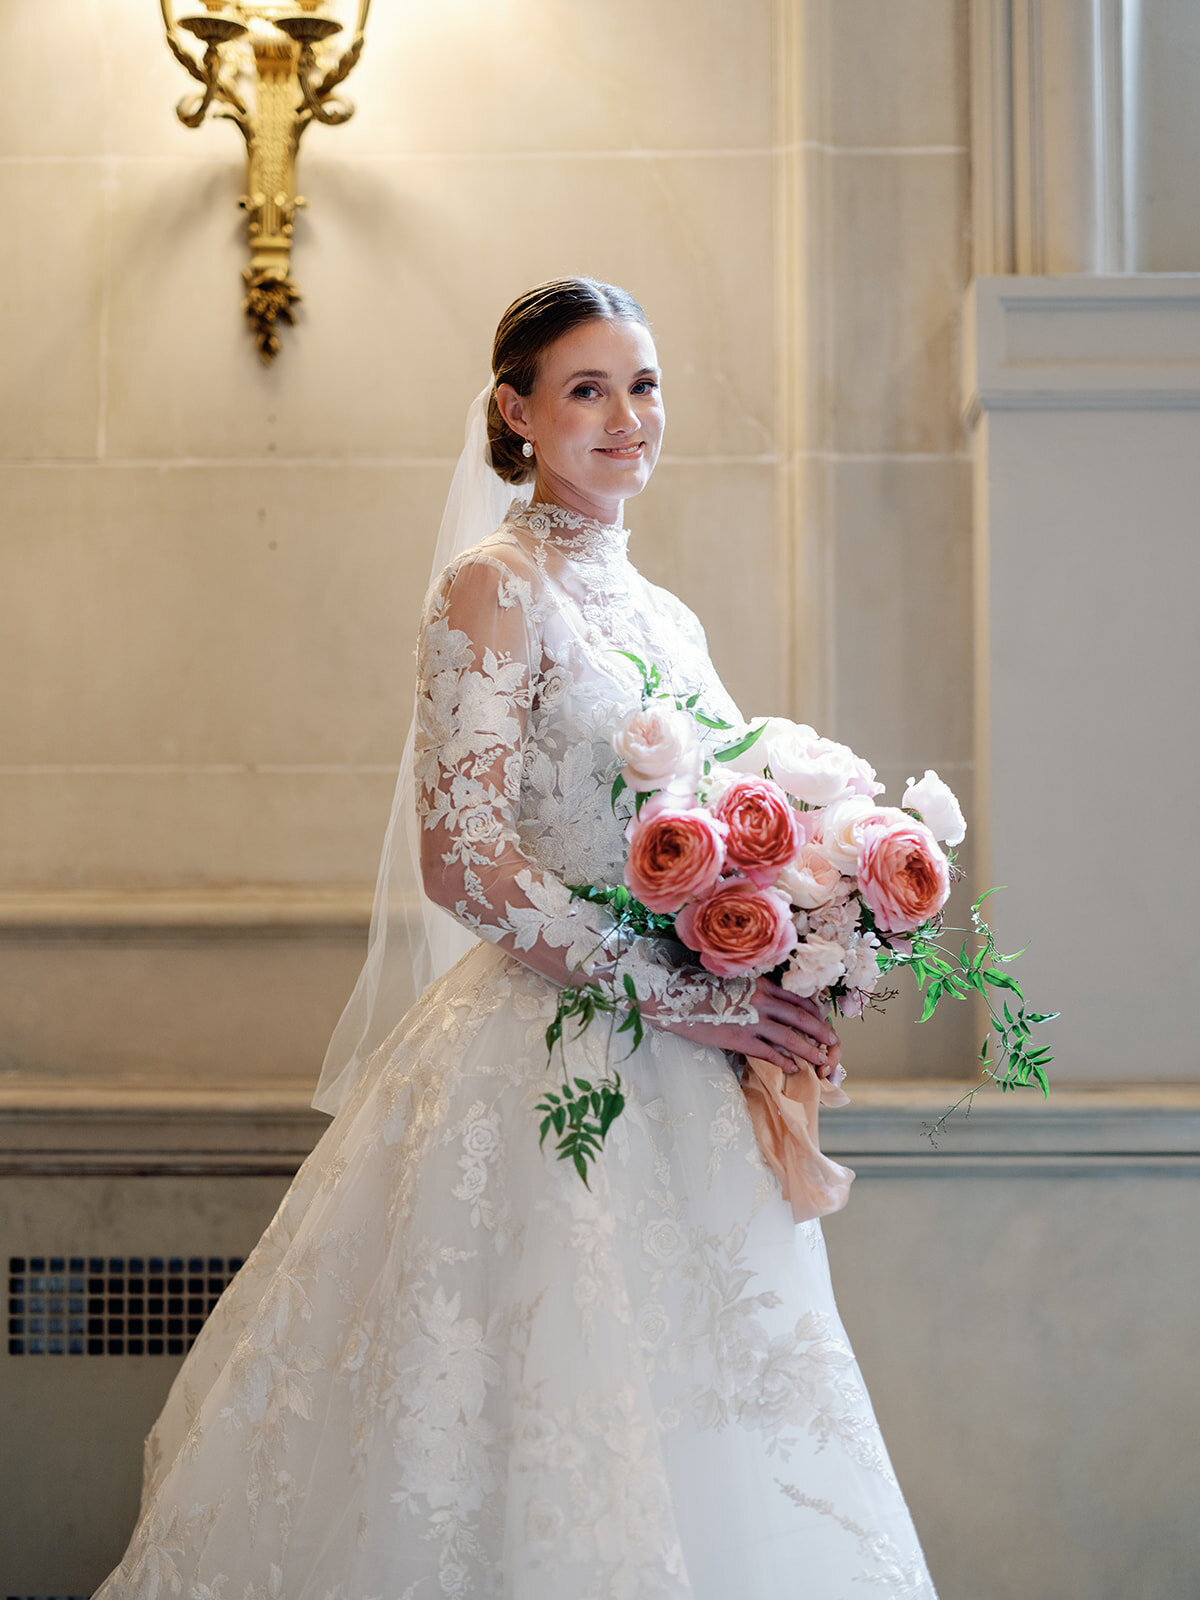 A bride stands by window light holding her  blush pink bouquet